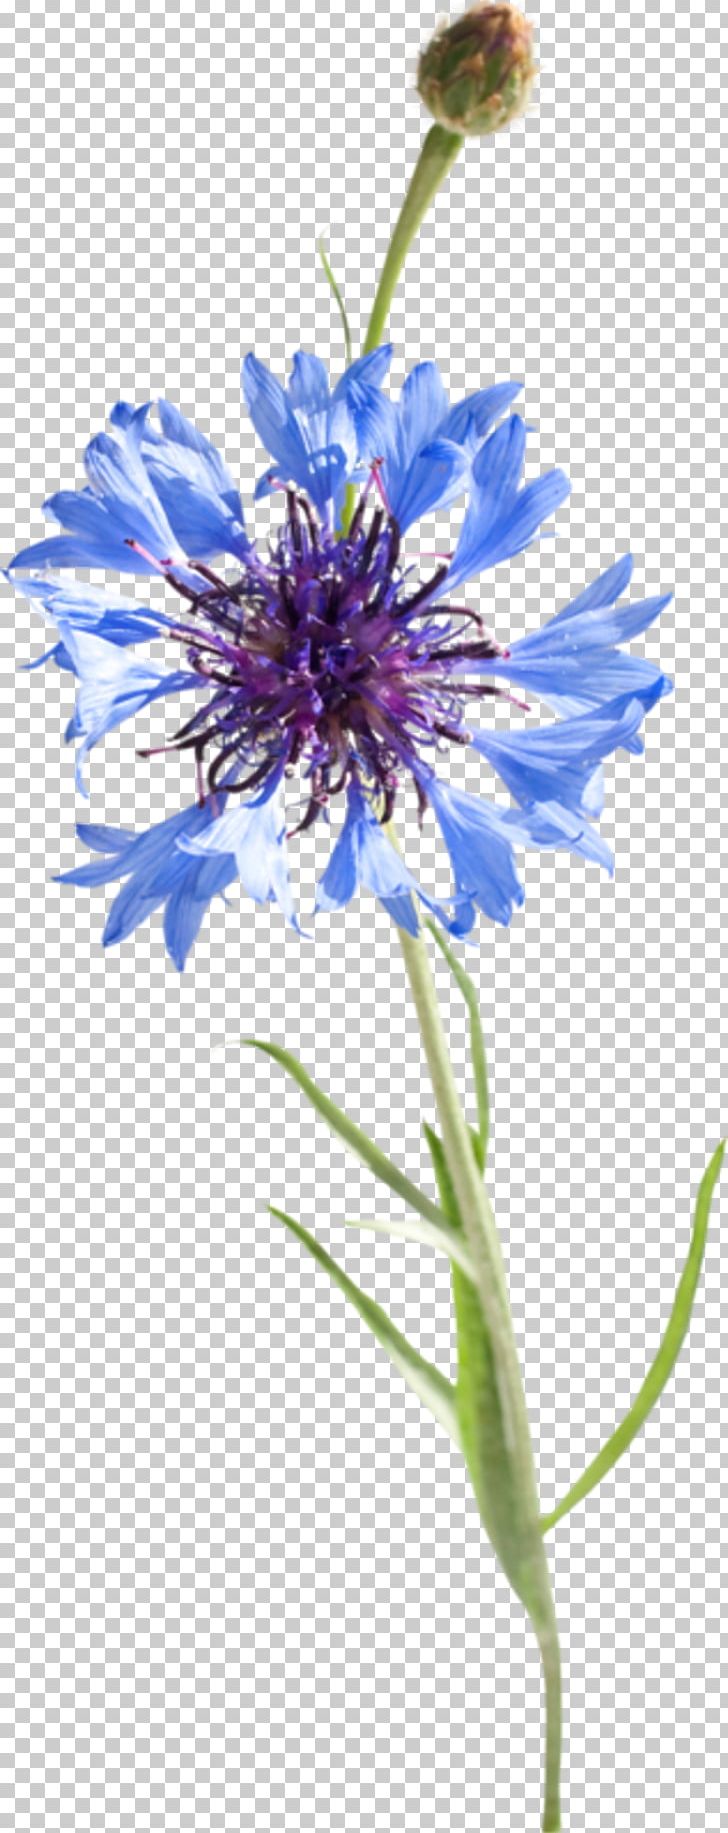 Cornflower Blue Watercolor Painting Drawing PNG, Clipart, Annual Plant, Aster, Bleuviolet, Blue, Botany Free PNG Download